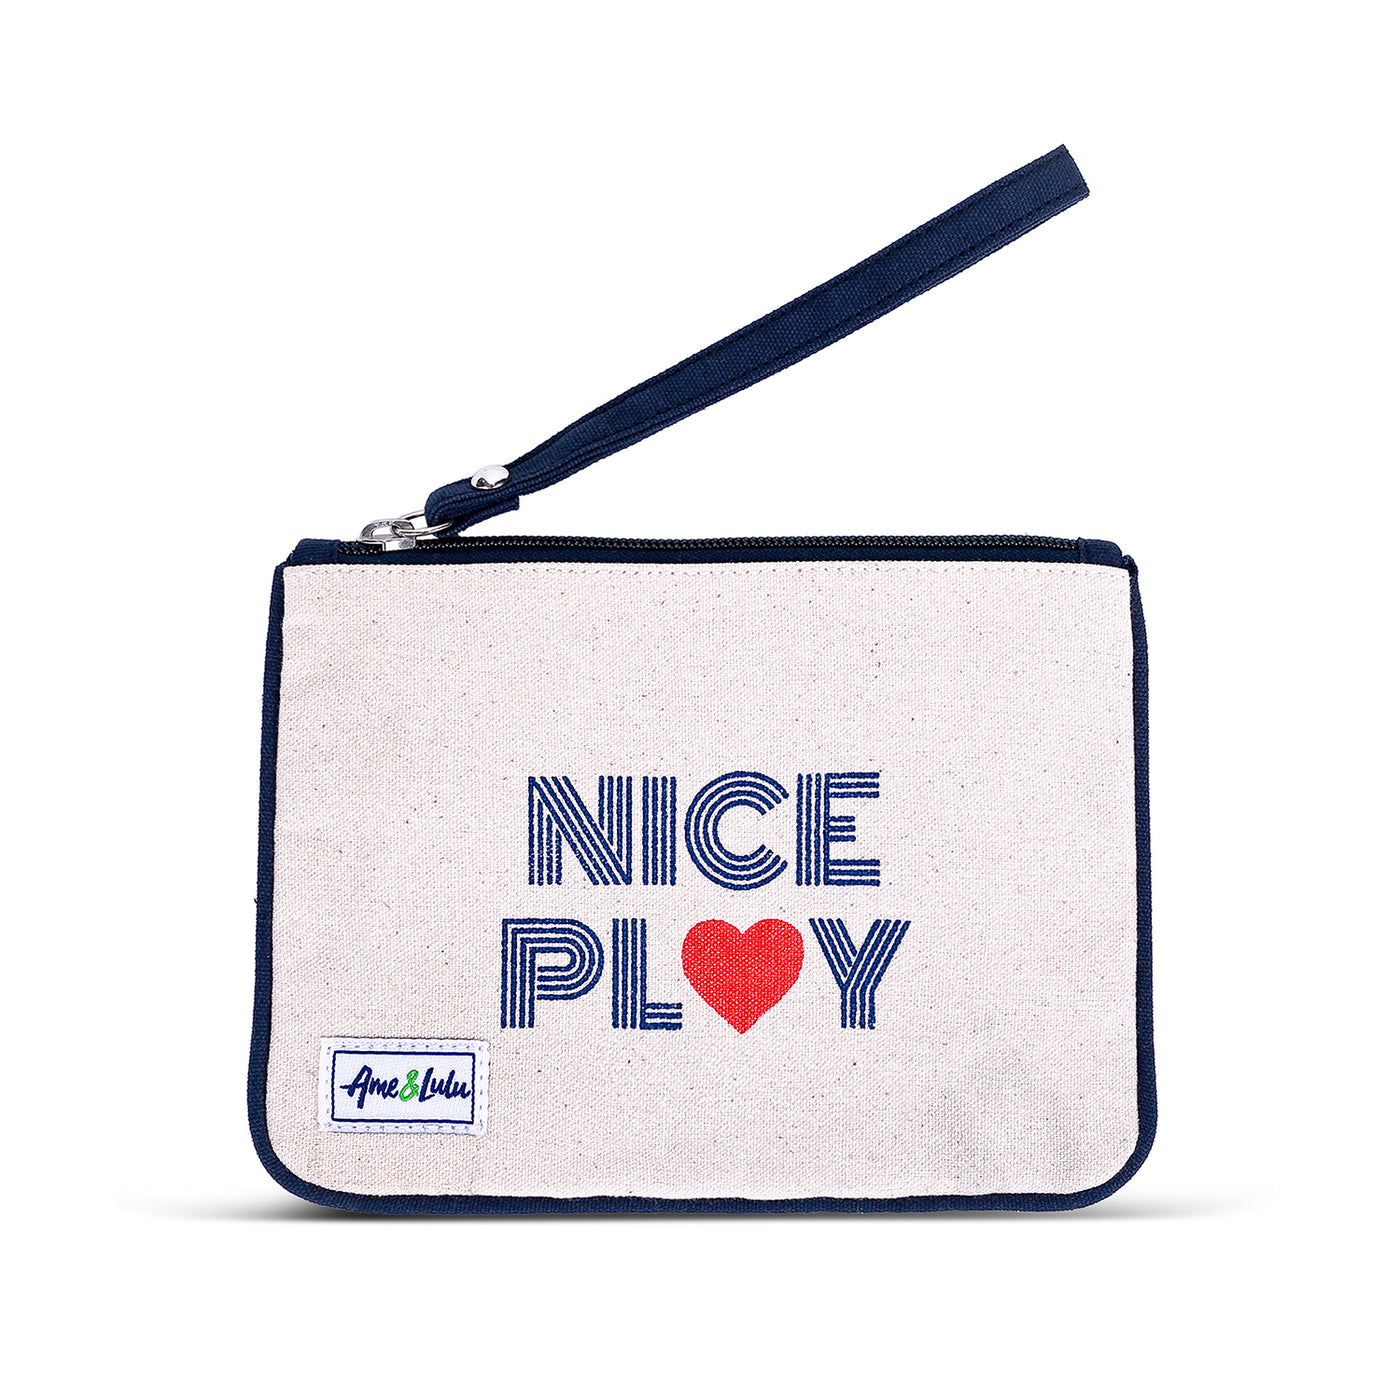 Small tan canvas wristlet with navy trim and strap. Front has the words "nice play" printed on the front in navy with a red heart